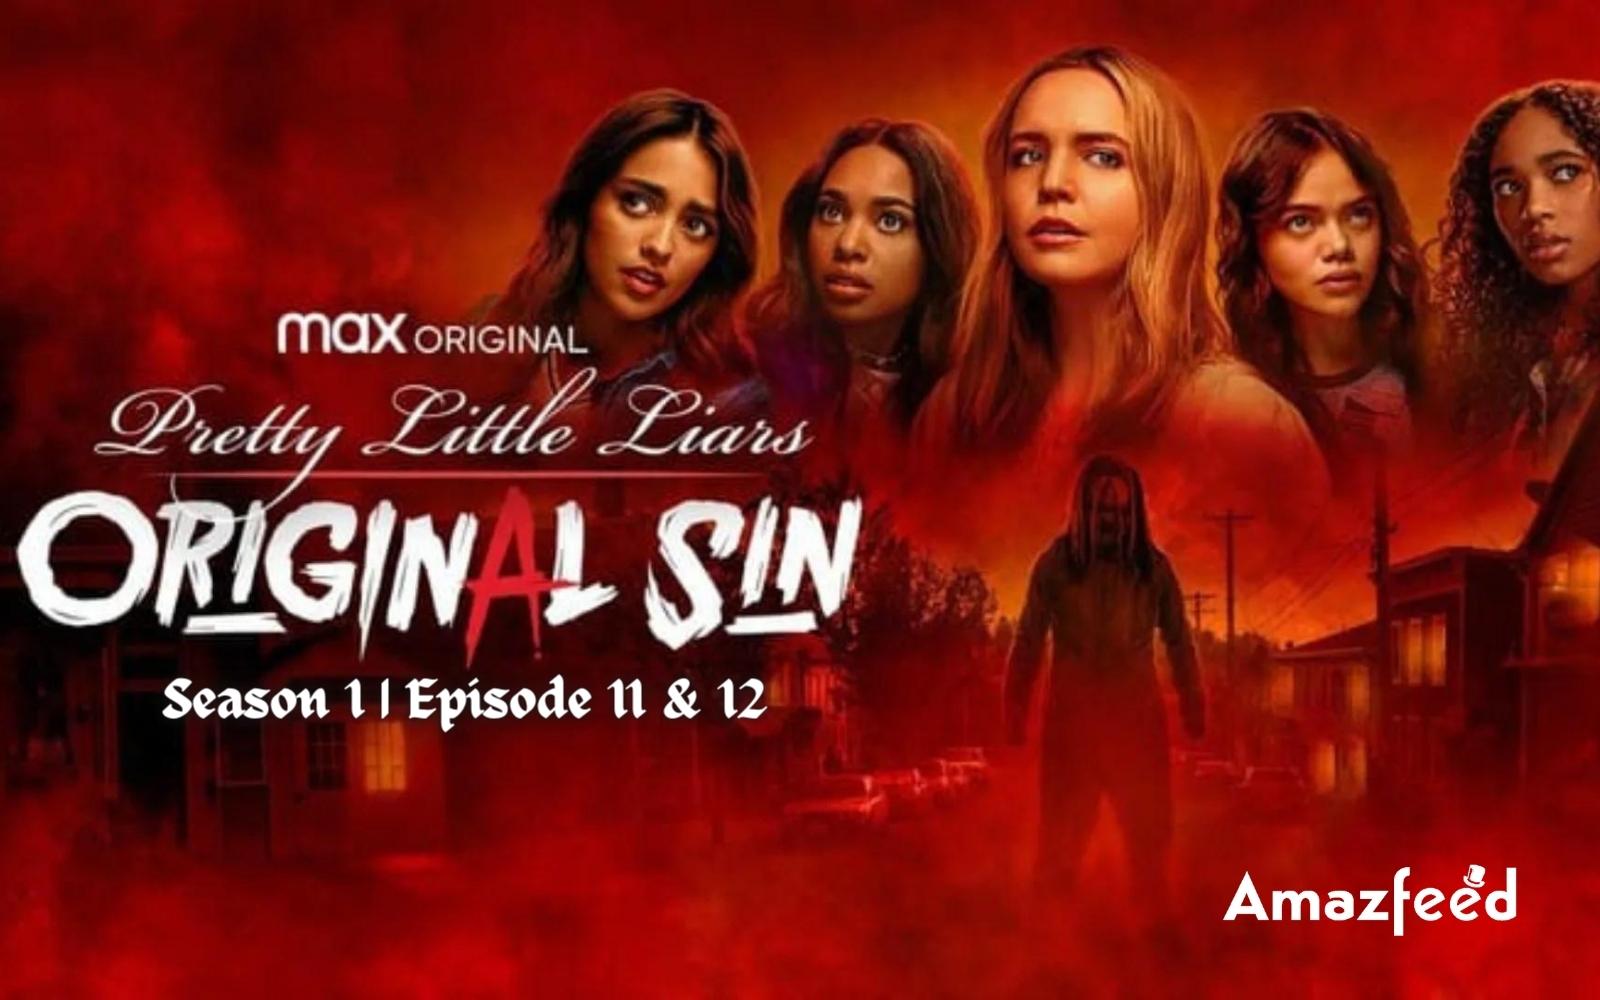 Is Pretty Little Liars: Original Sin Season 1 Episode 11 & 12 Cancelled Its Premiere On HBO And HBO Max